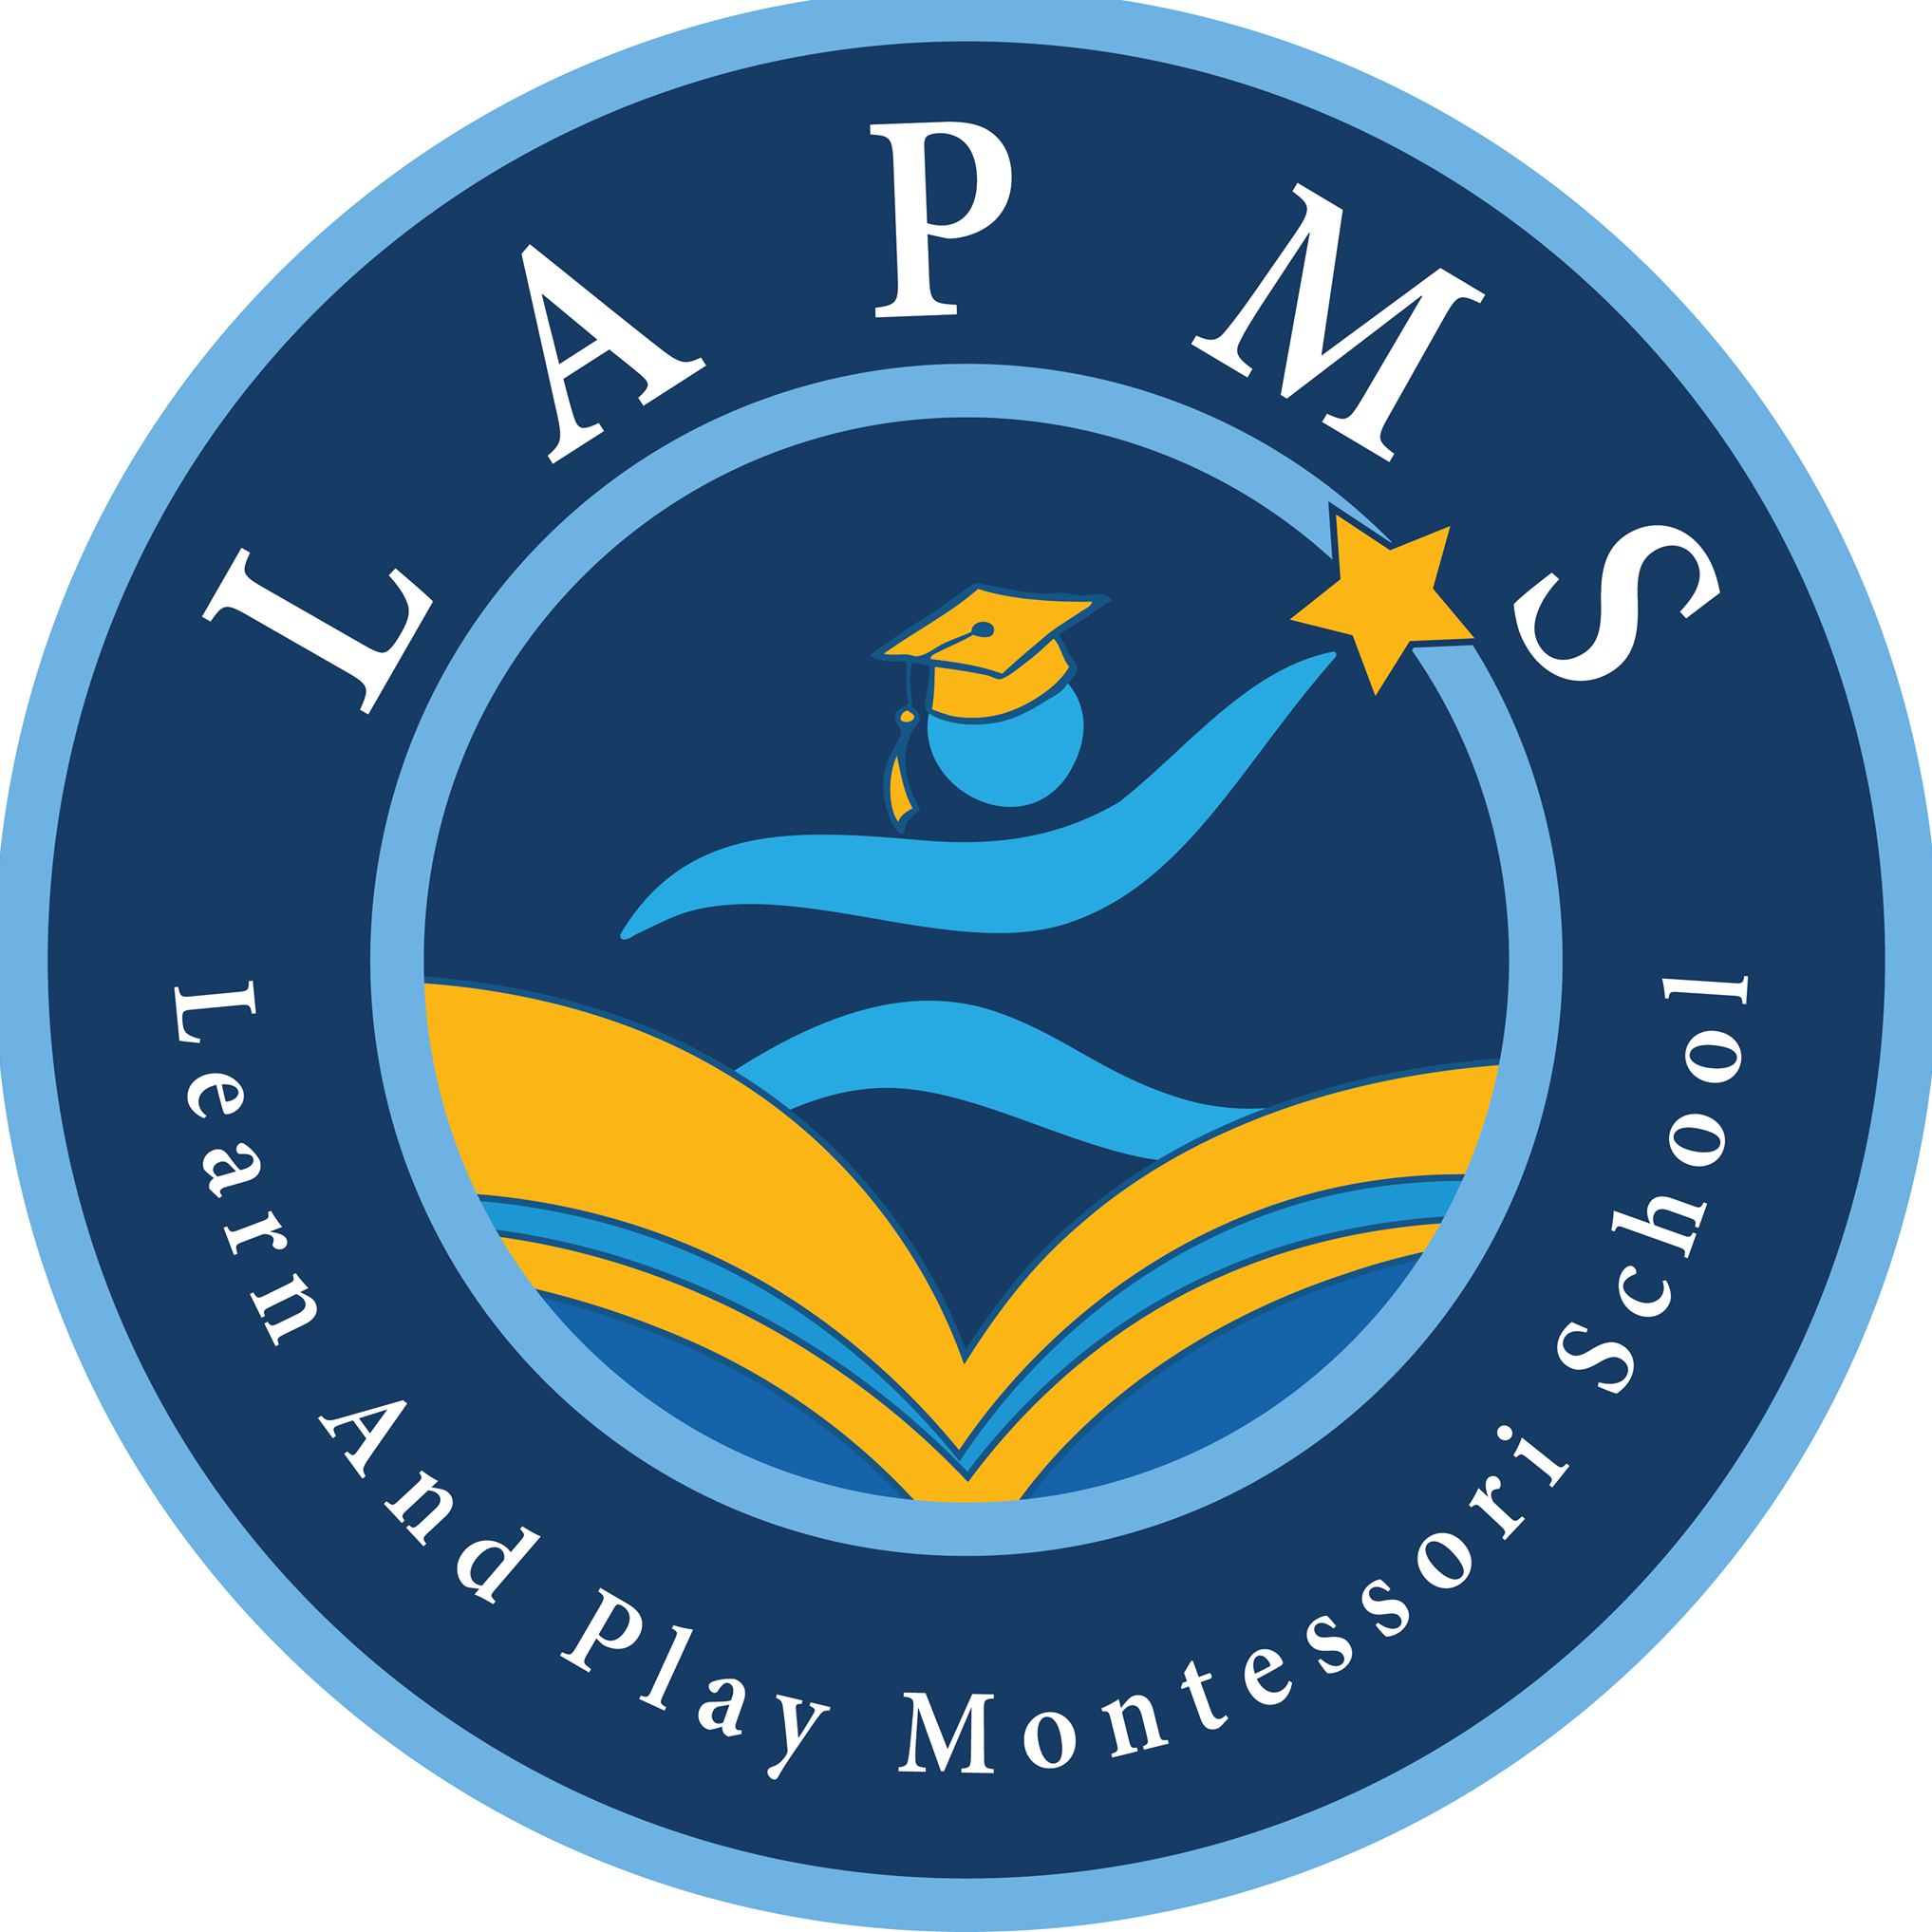 Business logo of Learn and Play Montessori School